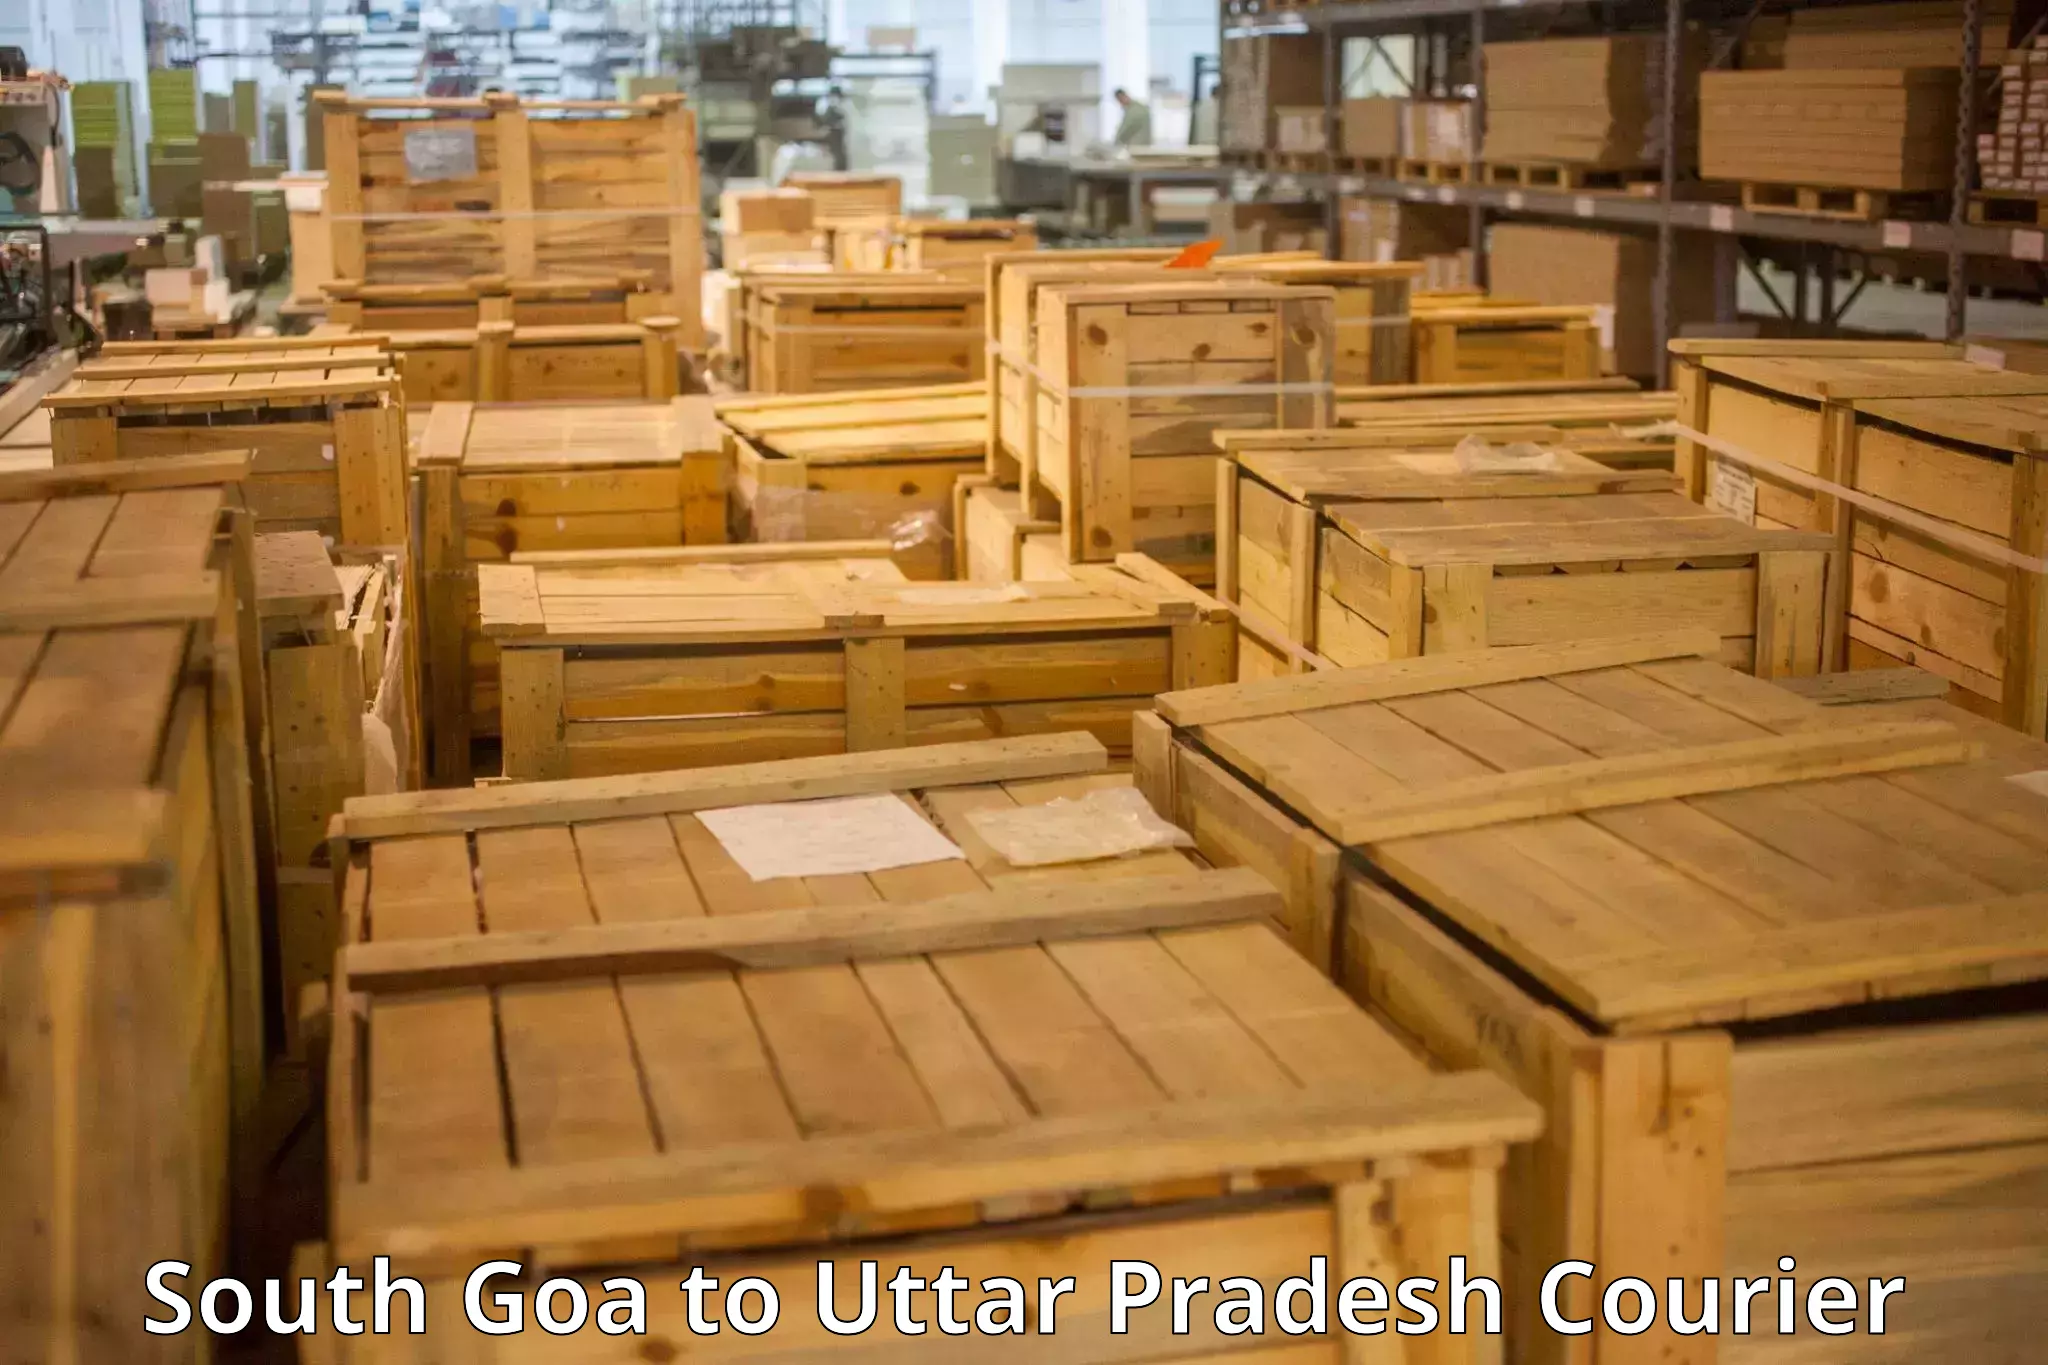 Luggage shipping specialists South Goa to Khalilabad